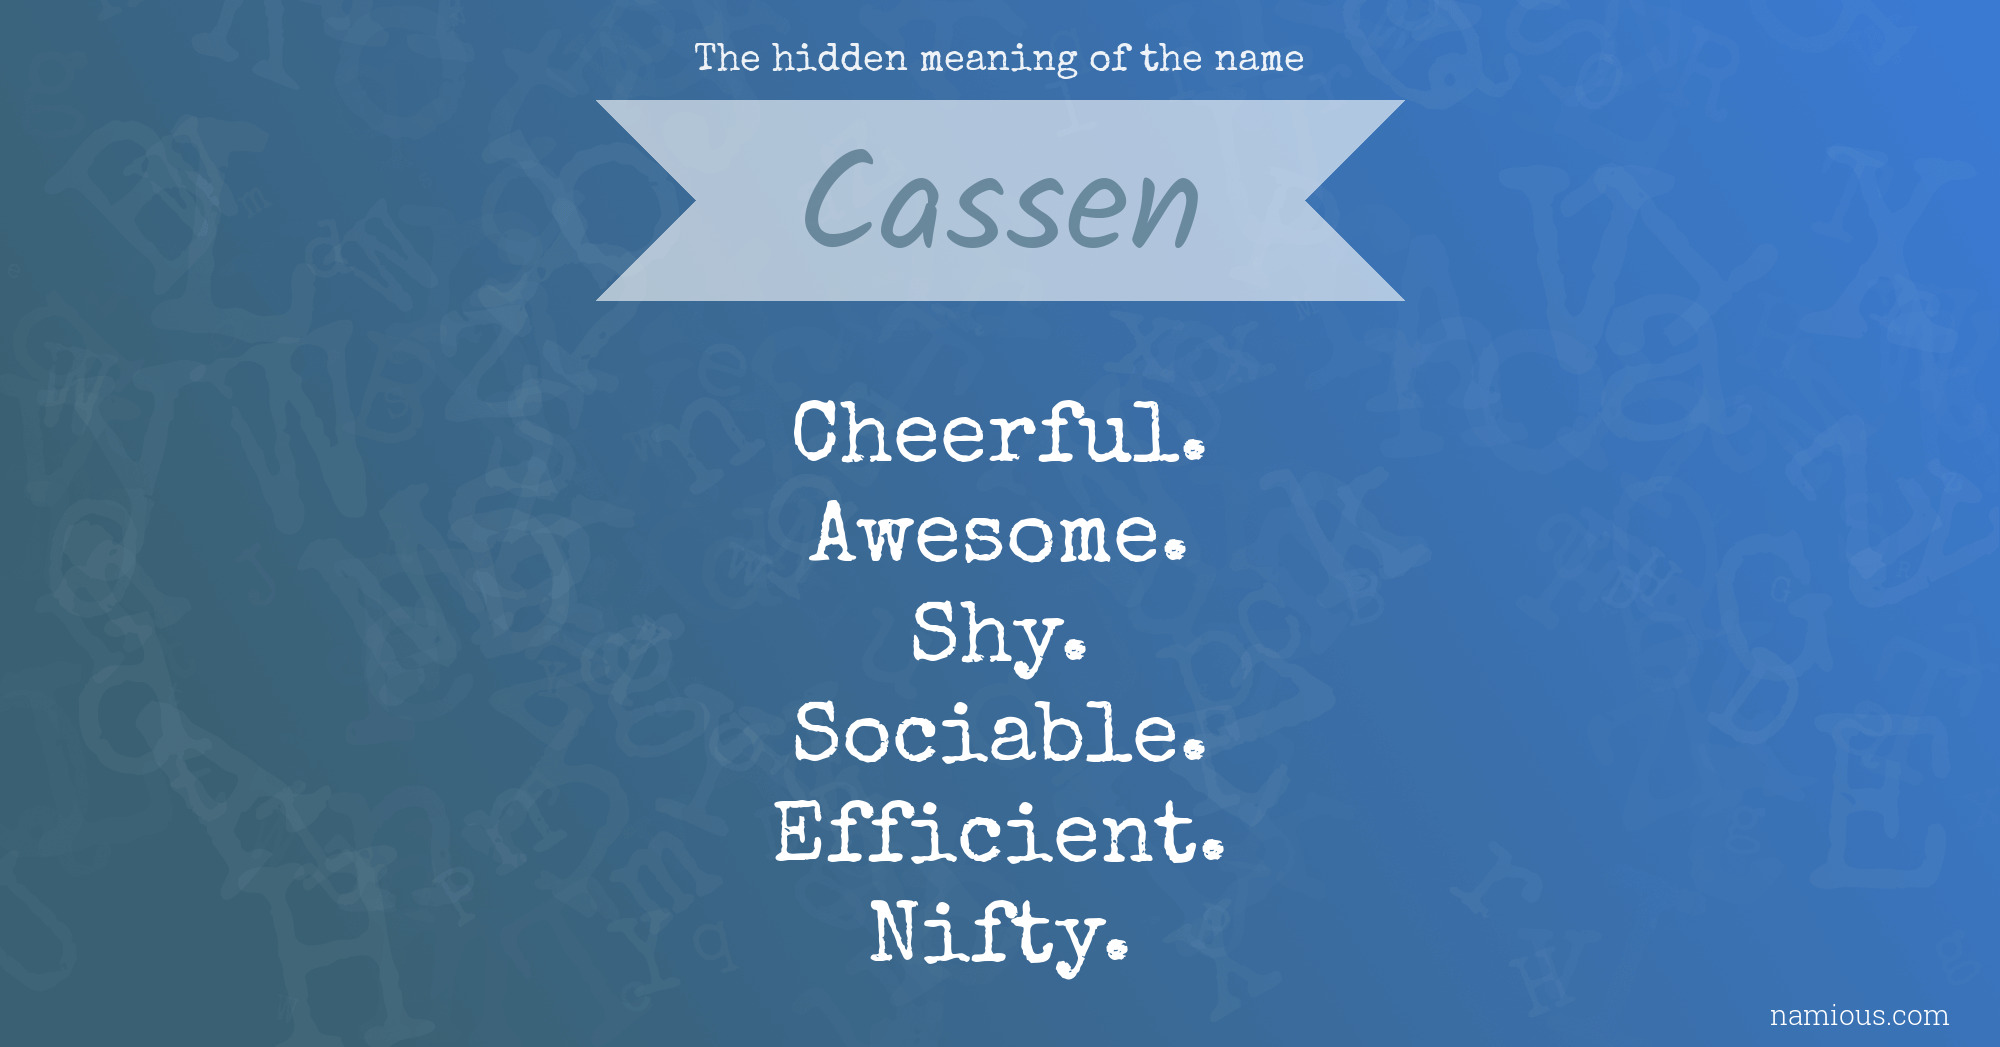 The hidden meaning of the name Cassen